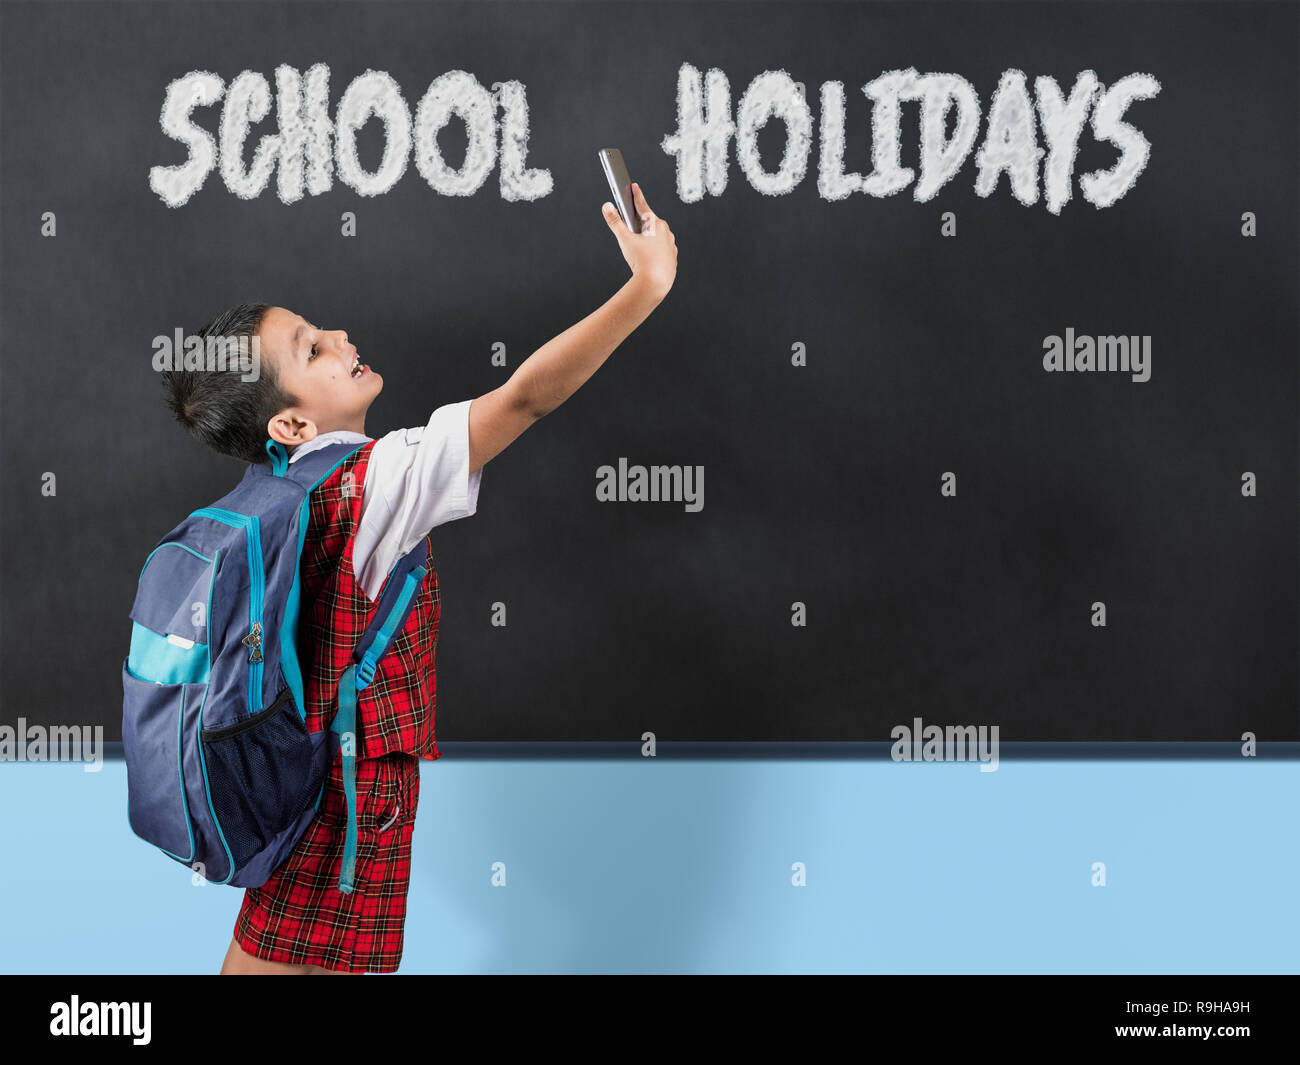 Young asian school boy wearing red uniform taking selfie with mobile phone infront of blackboard and written text 'school holidays' Stock Photo